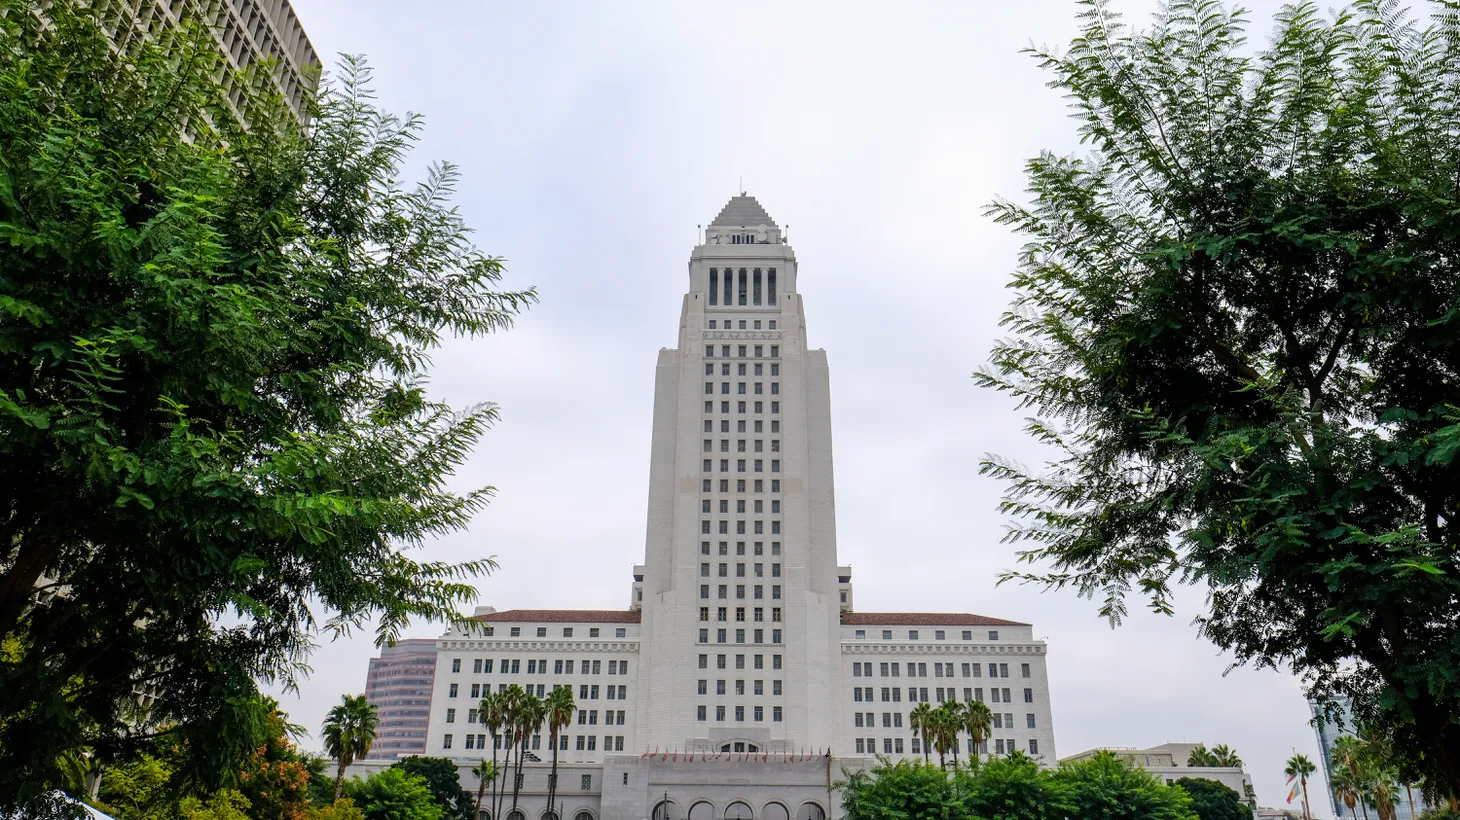 LA City Hall is seen on a cloudy day.